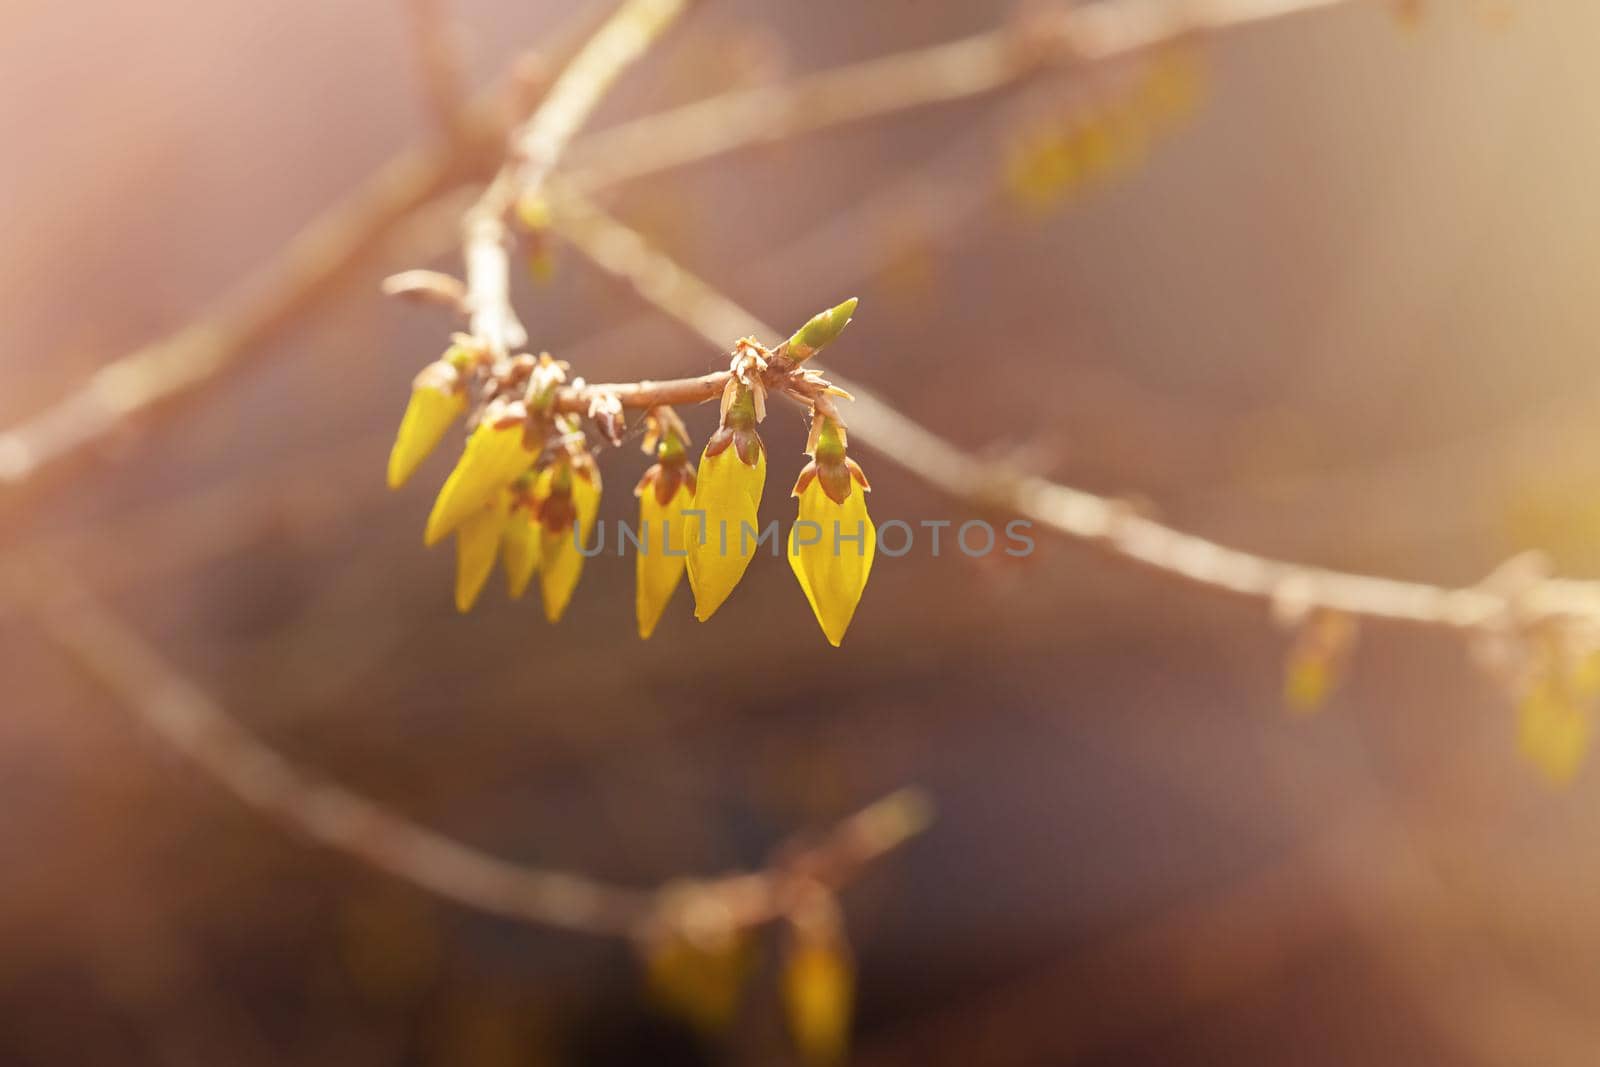 Buds and flowers of yellow forsythia against the blurred background  by galinasharapova